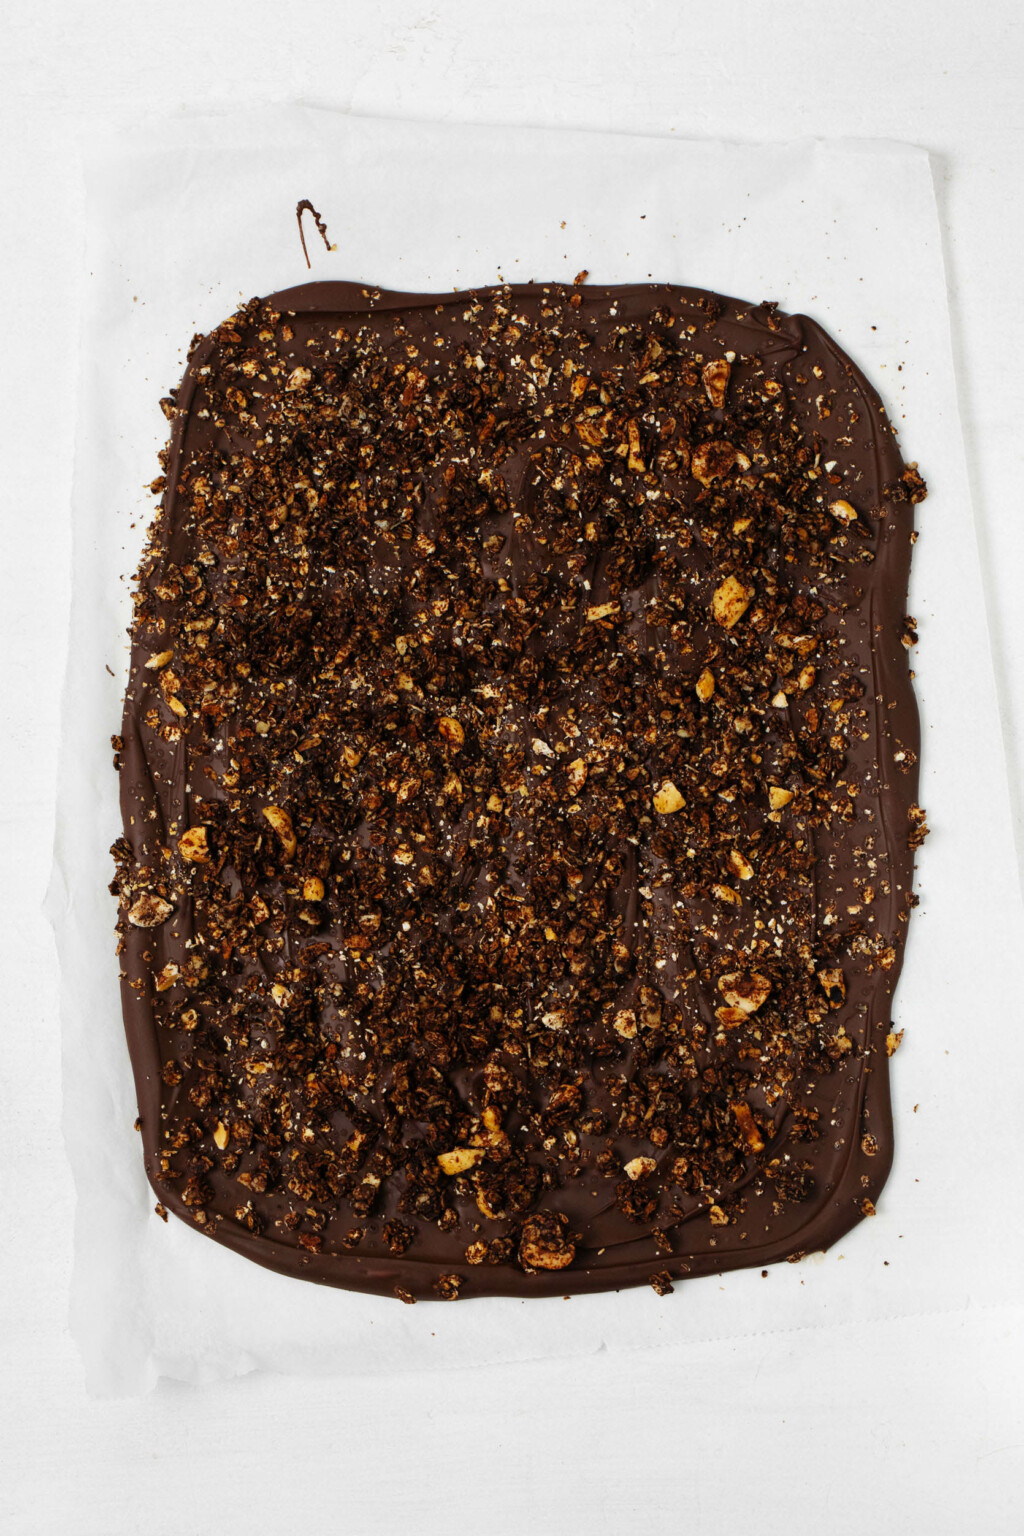 An overhead image of a baking sheet that has been covered with vegan dark chocolate bark. the bark is studded with granola, dried fruit, and chopped walnuts.